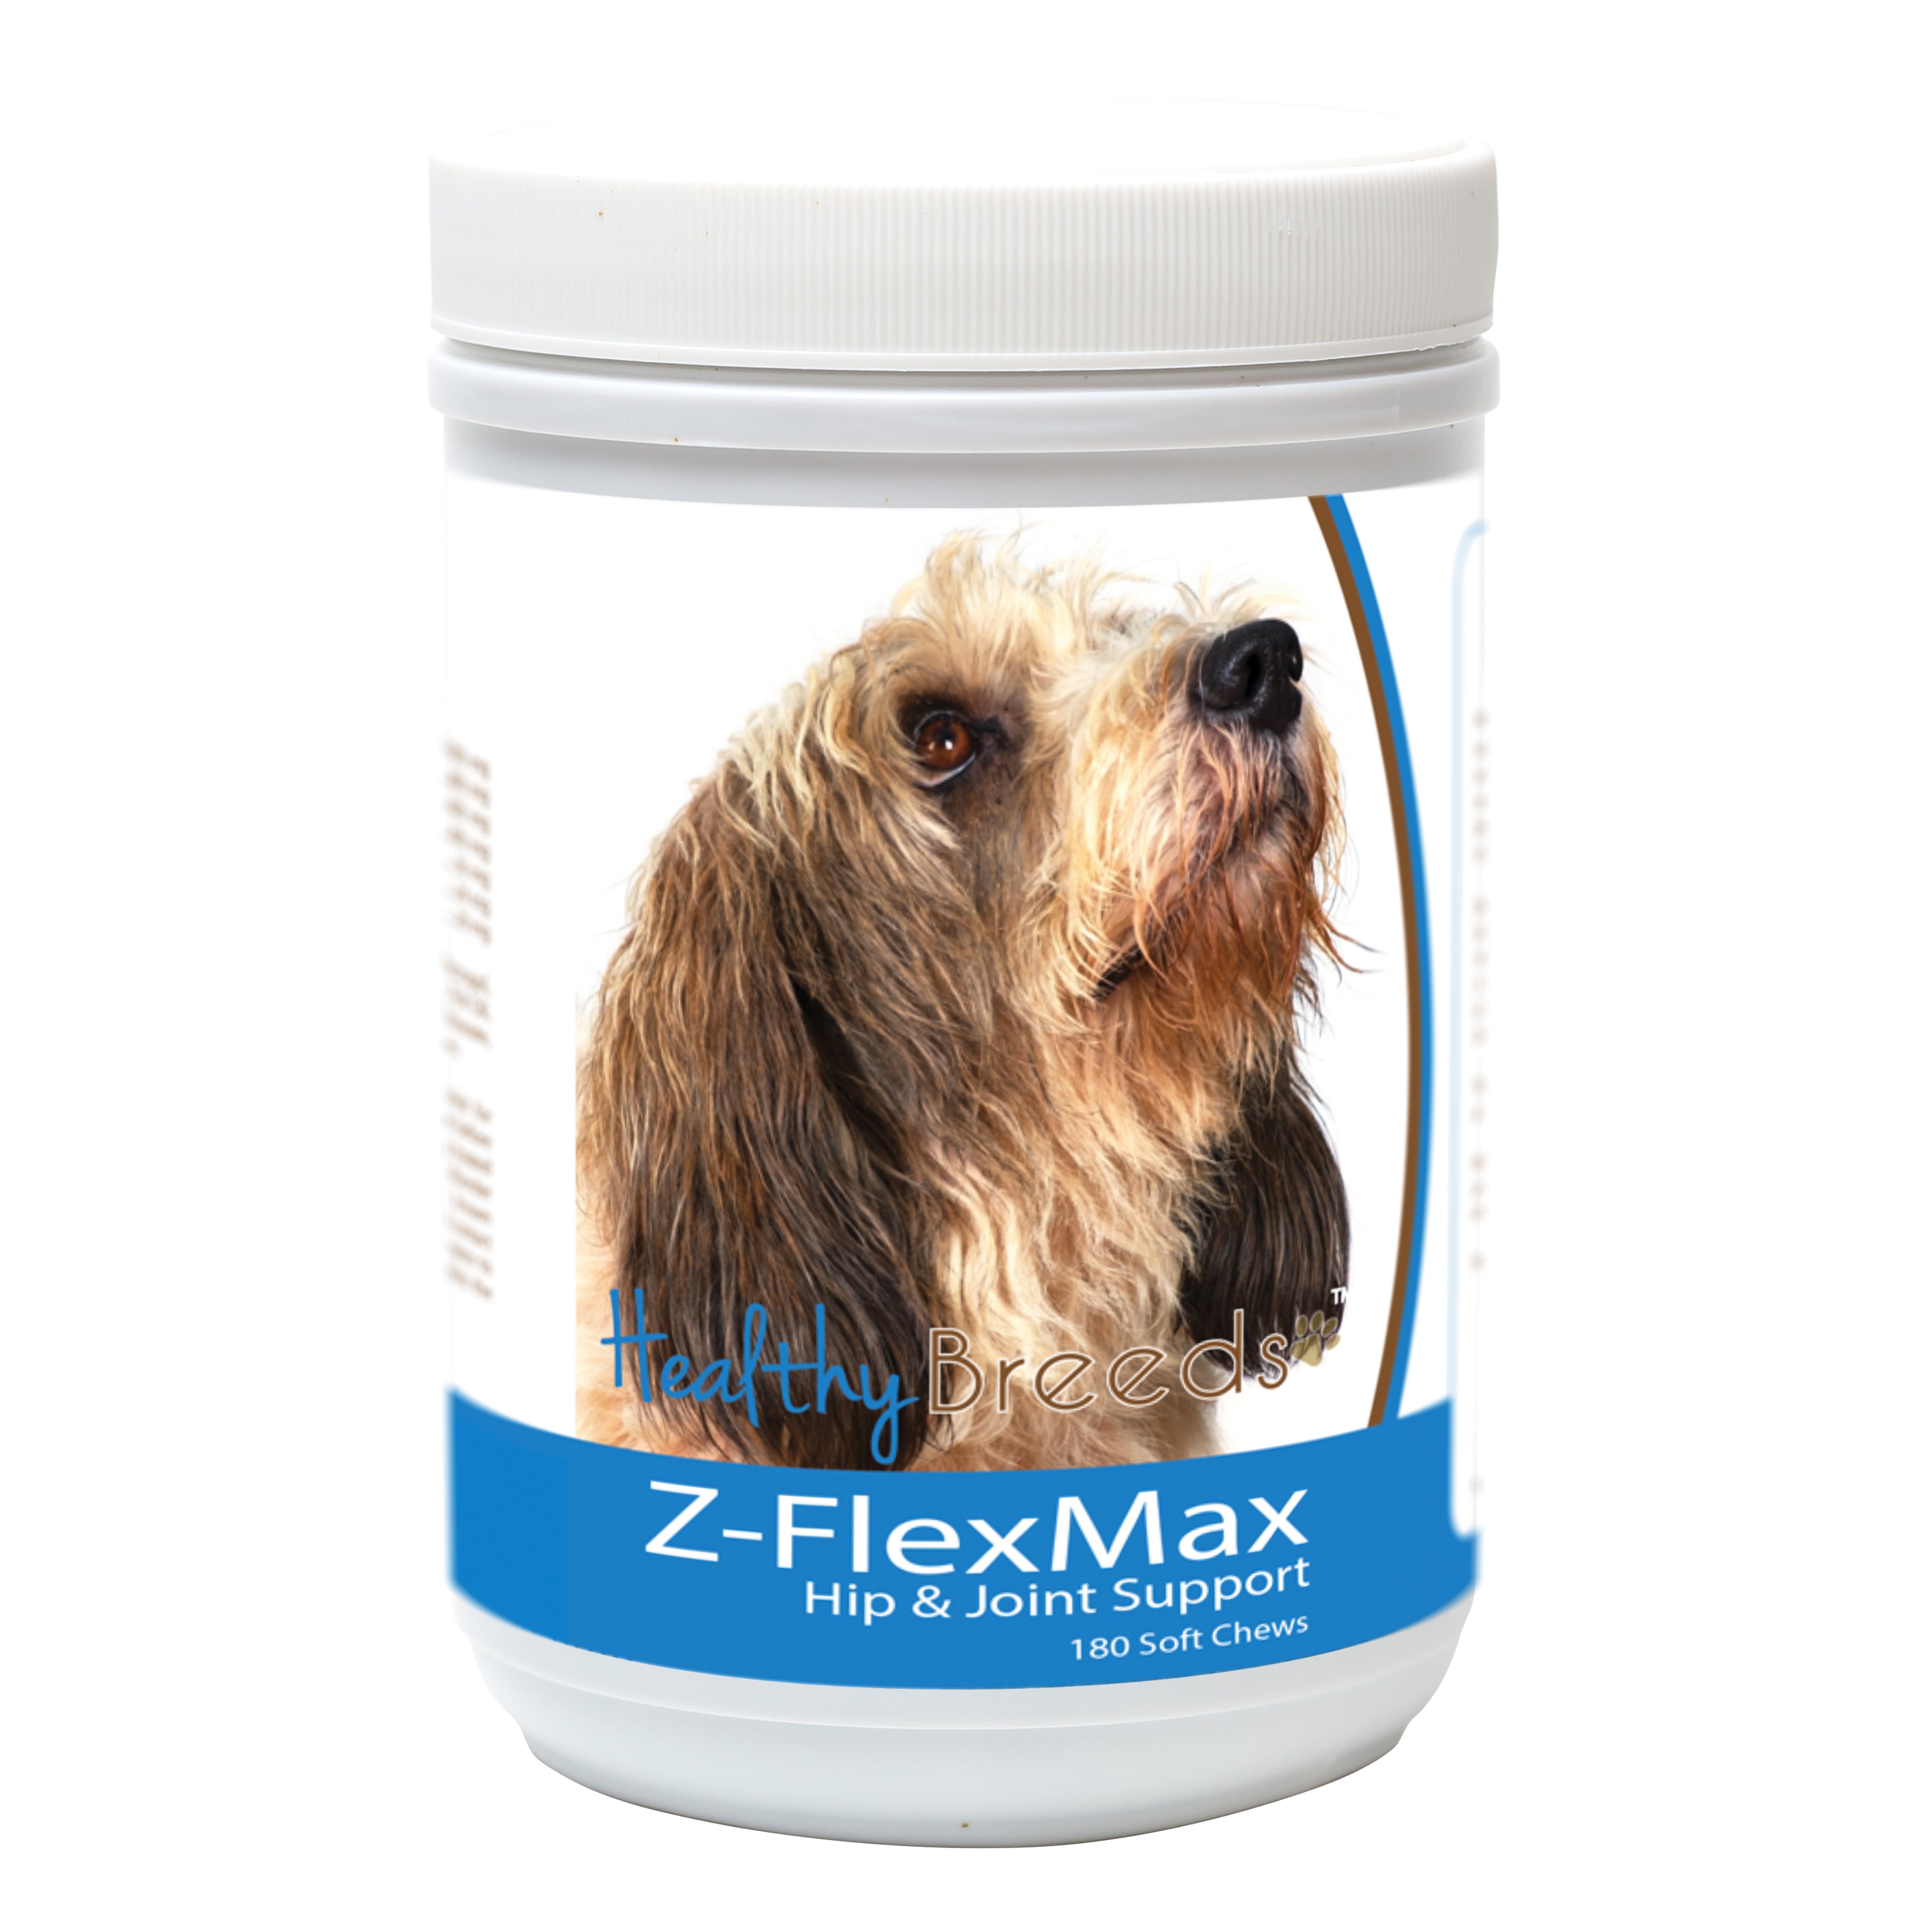 Petits Bassets Griffons Vendeen Z-Flex Max Dog Hip and Joint Support 180 Count